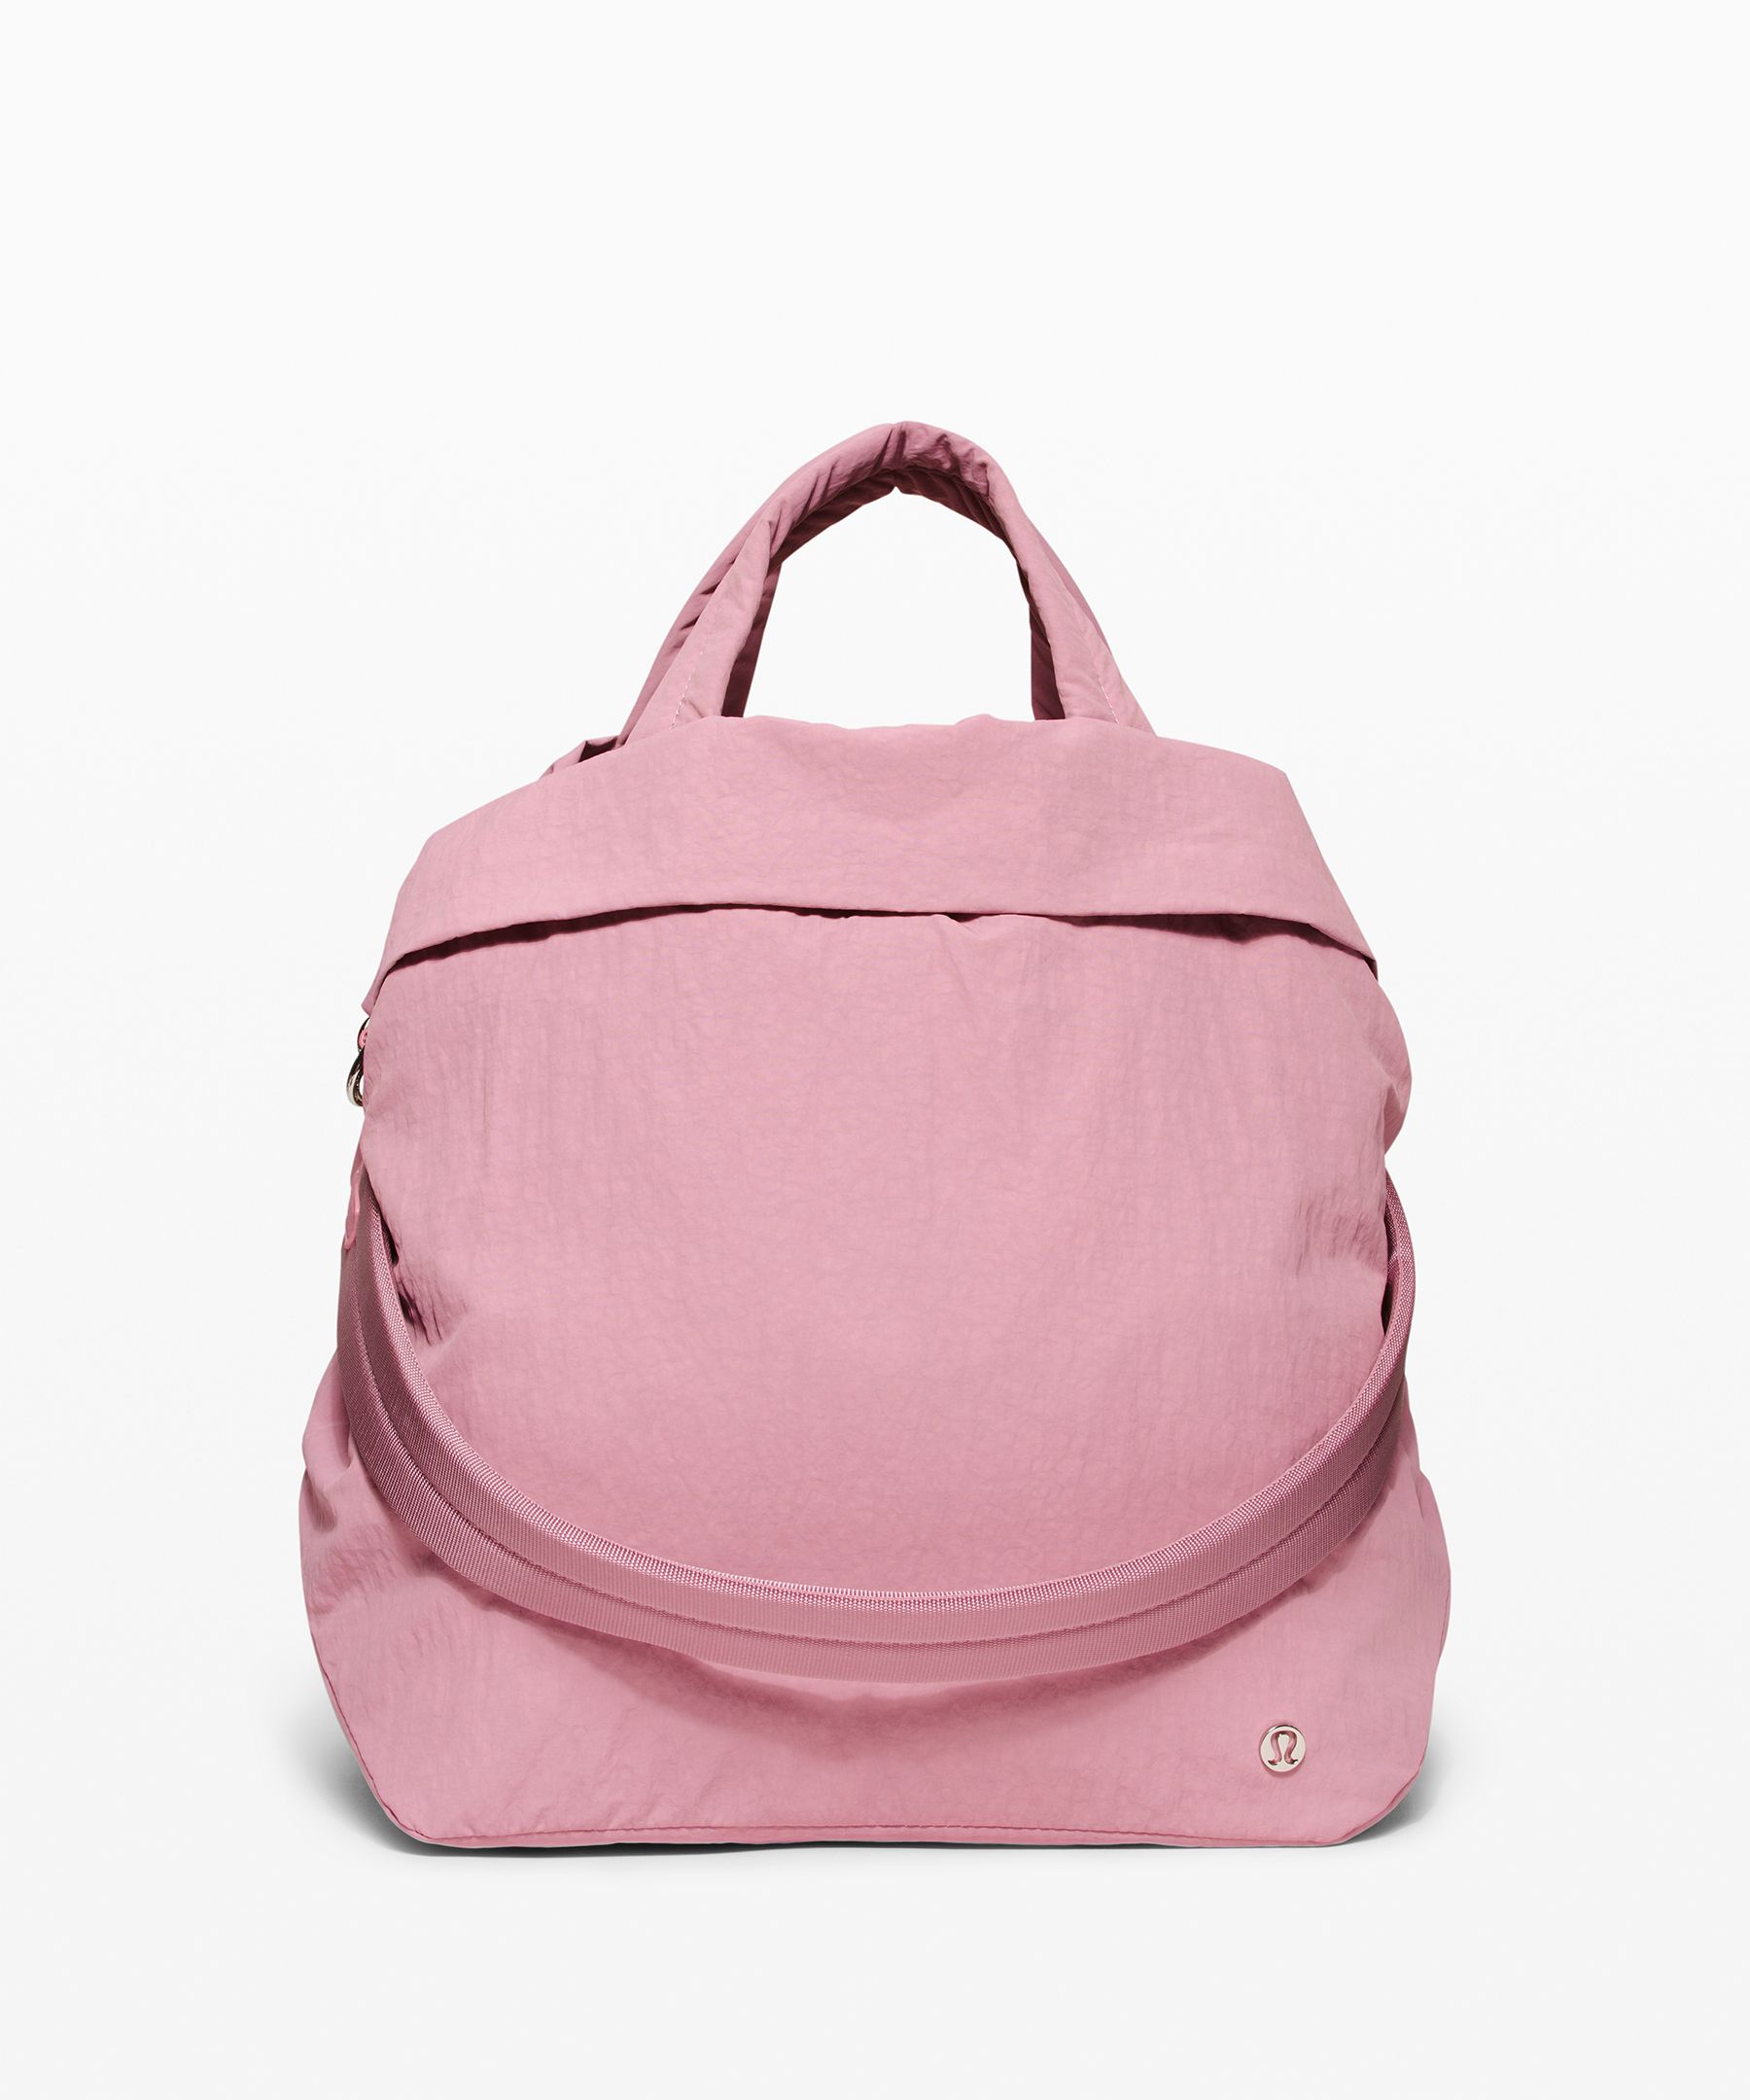 Lululemon On My Level Bag *micro 5l In Pink Taupe